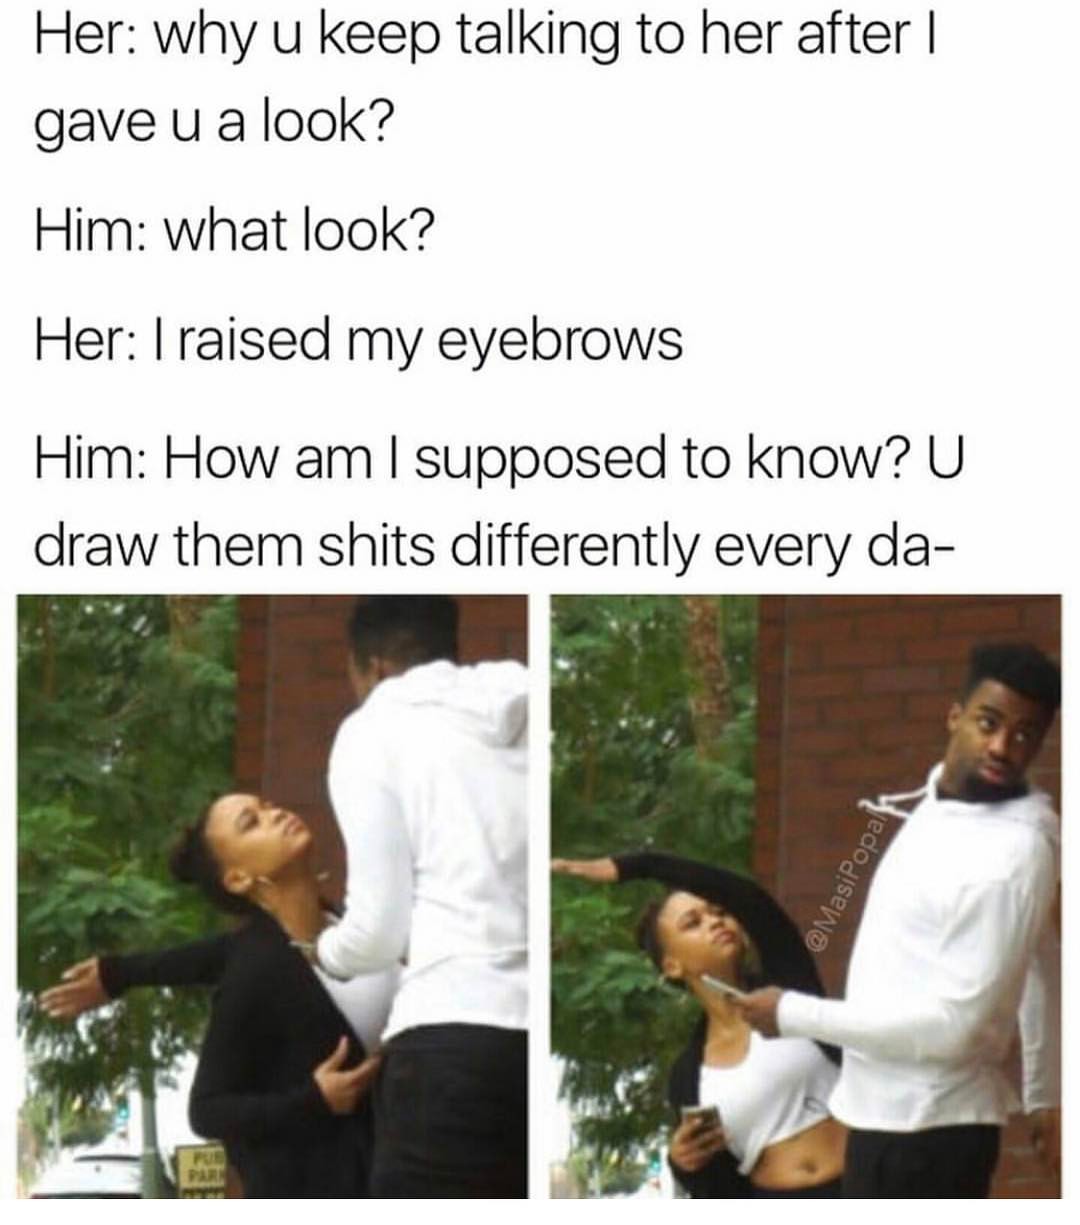 Her: why u keep talking to her after I gave u a look?  Him: what look?  Her: I raised my eyebrows.  Him: How am I supposed to know? U draw them shits differently every da-